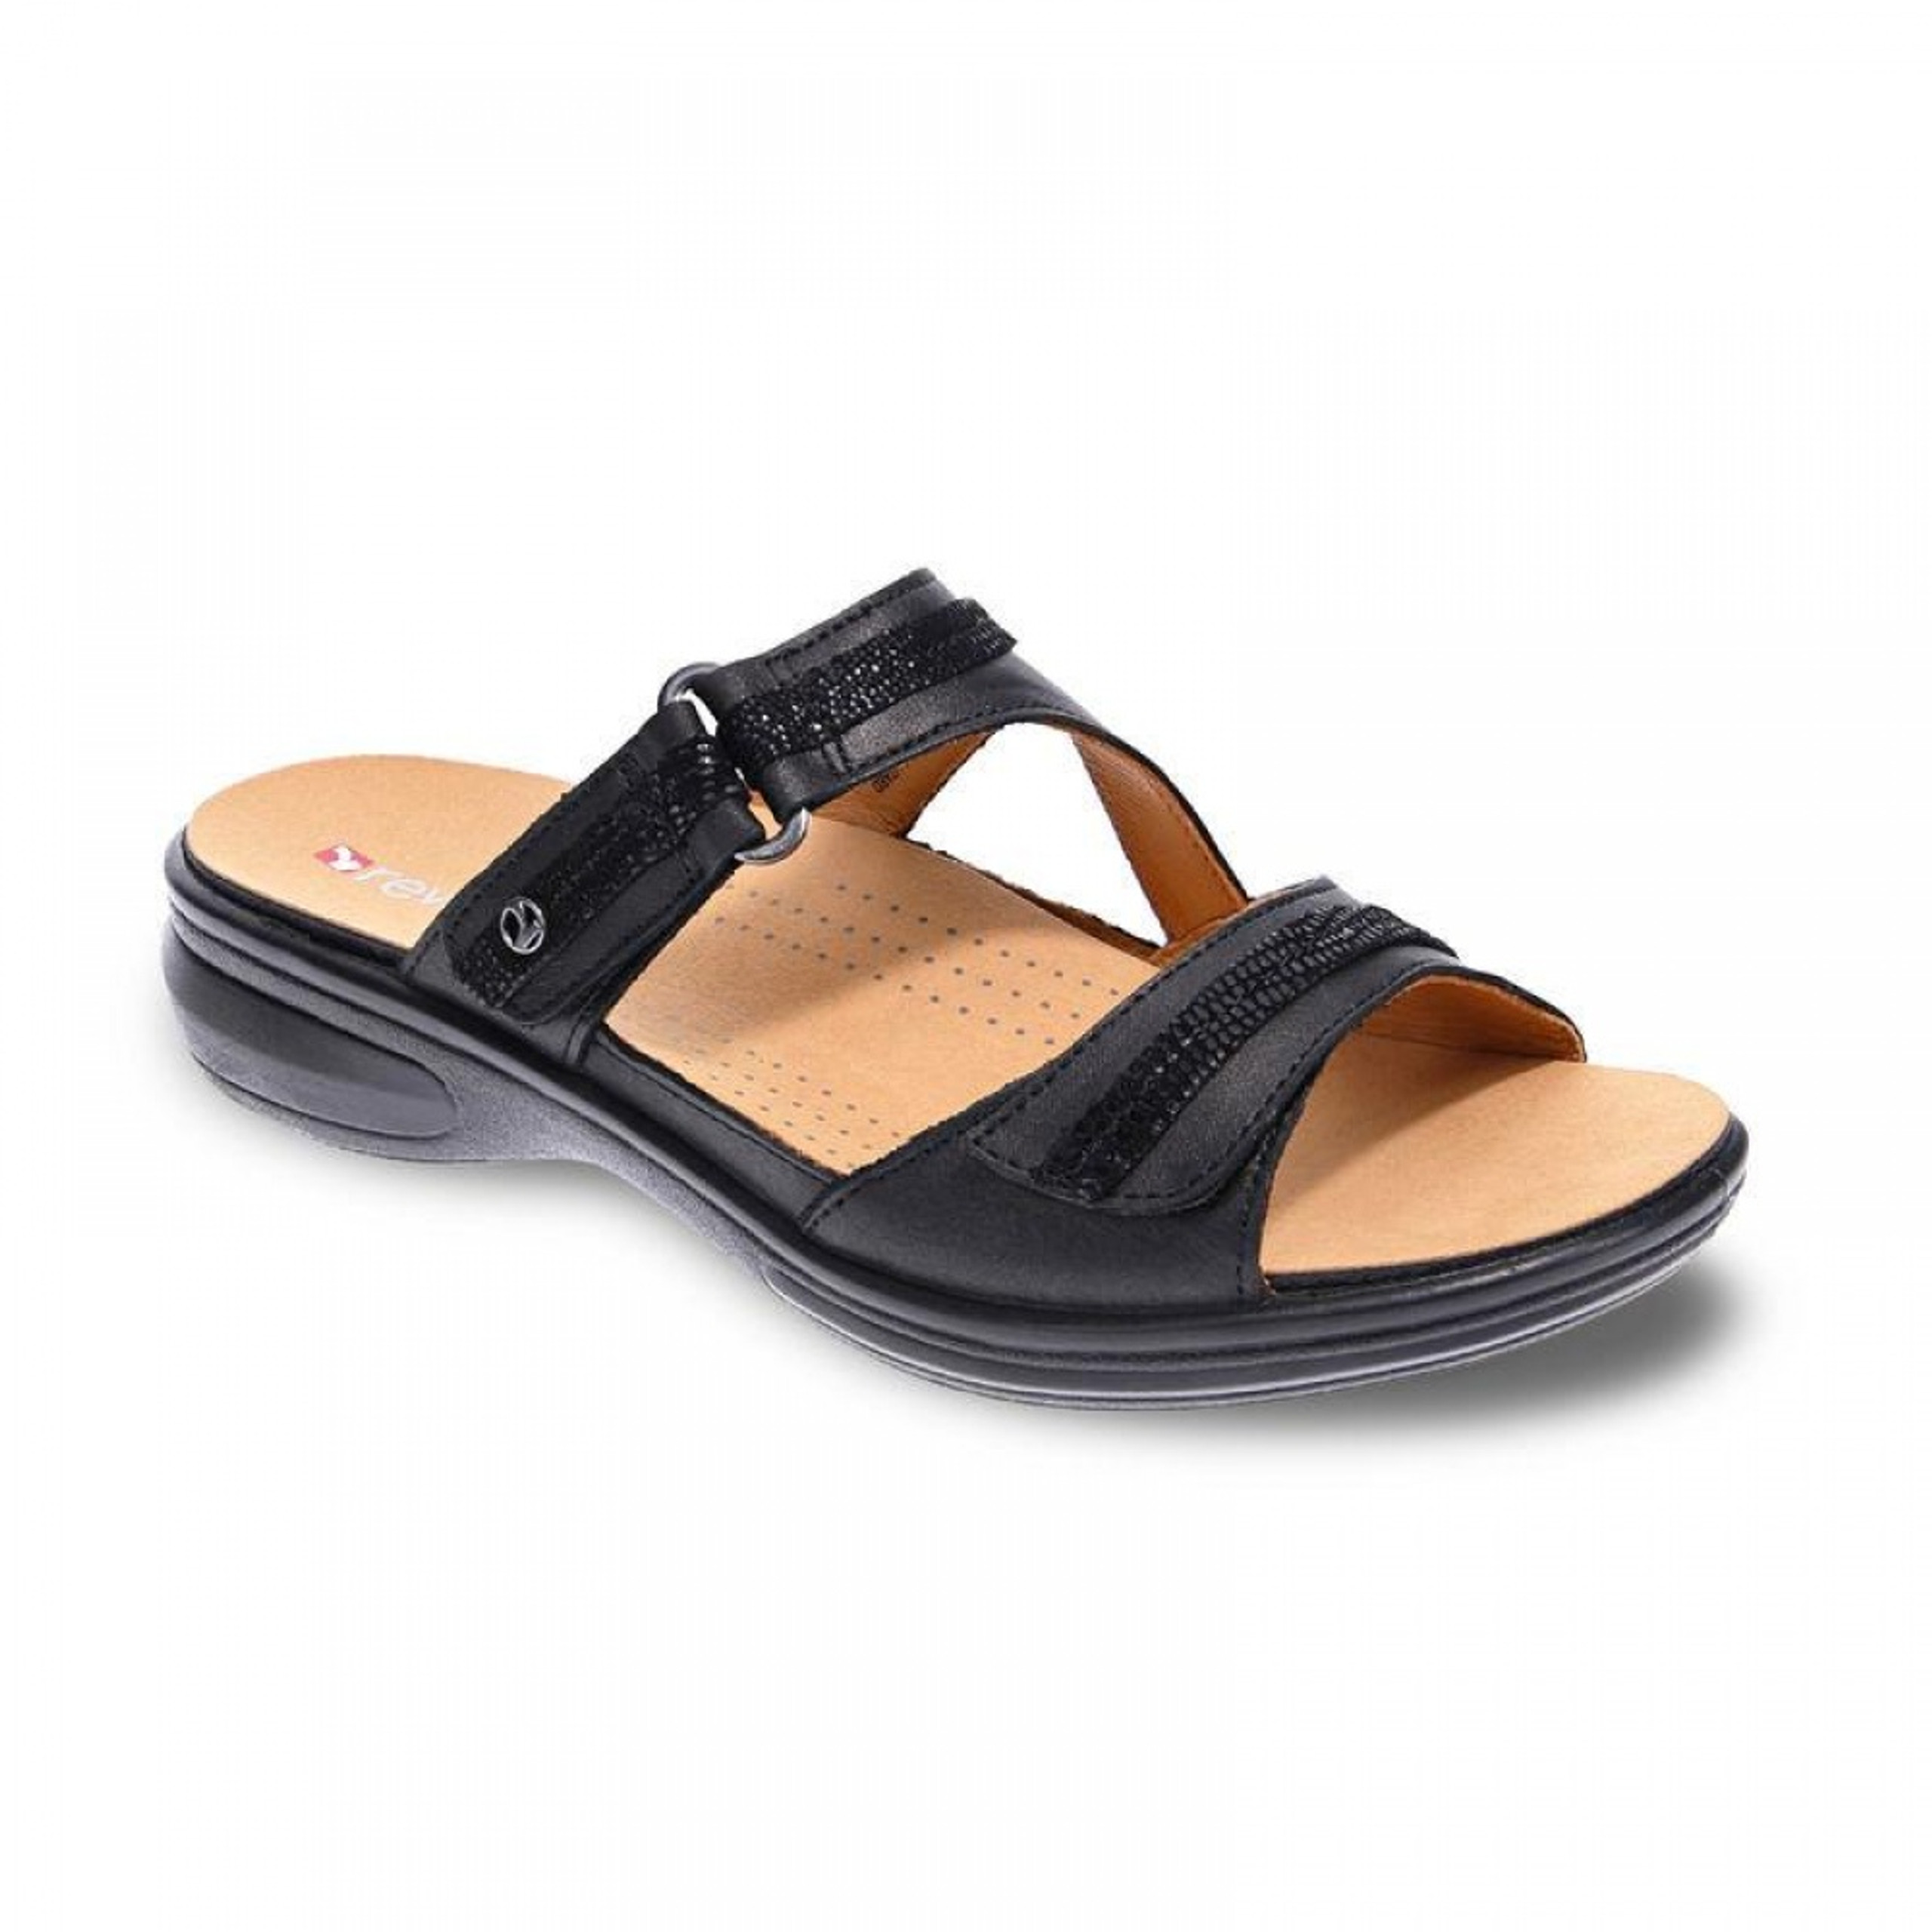 Revere Orthotic-Freiendly Sandals and Footwear - Free Shipping ...